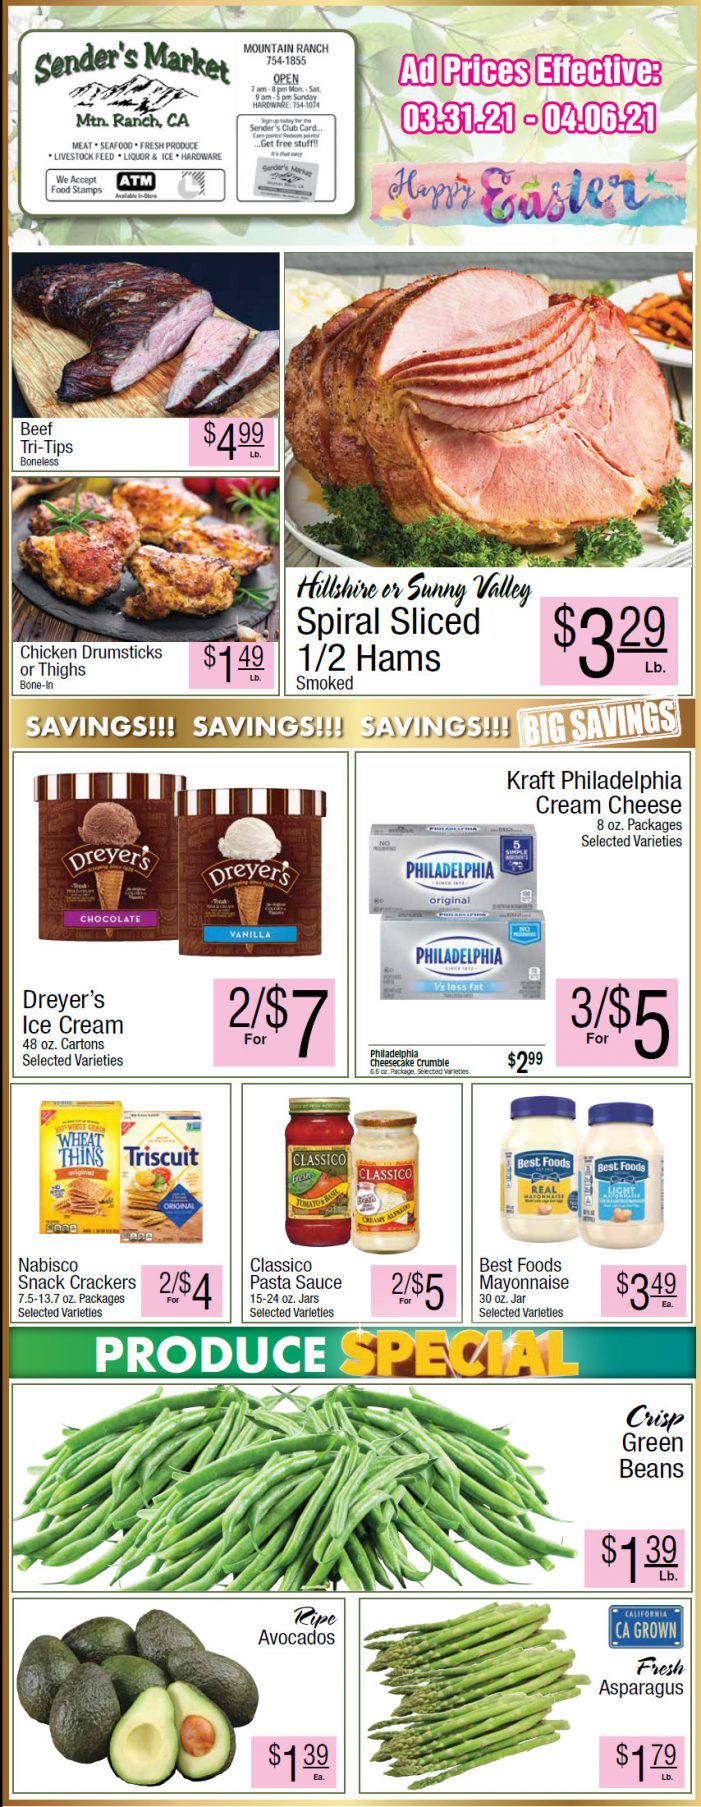 Sender’s Market’s Weekly Ad & Grocery Specials Through April 6th.  Shop Local & Save!